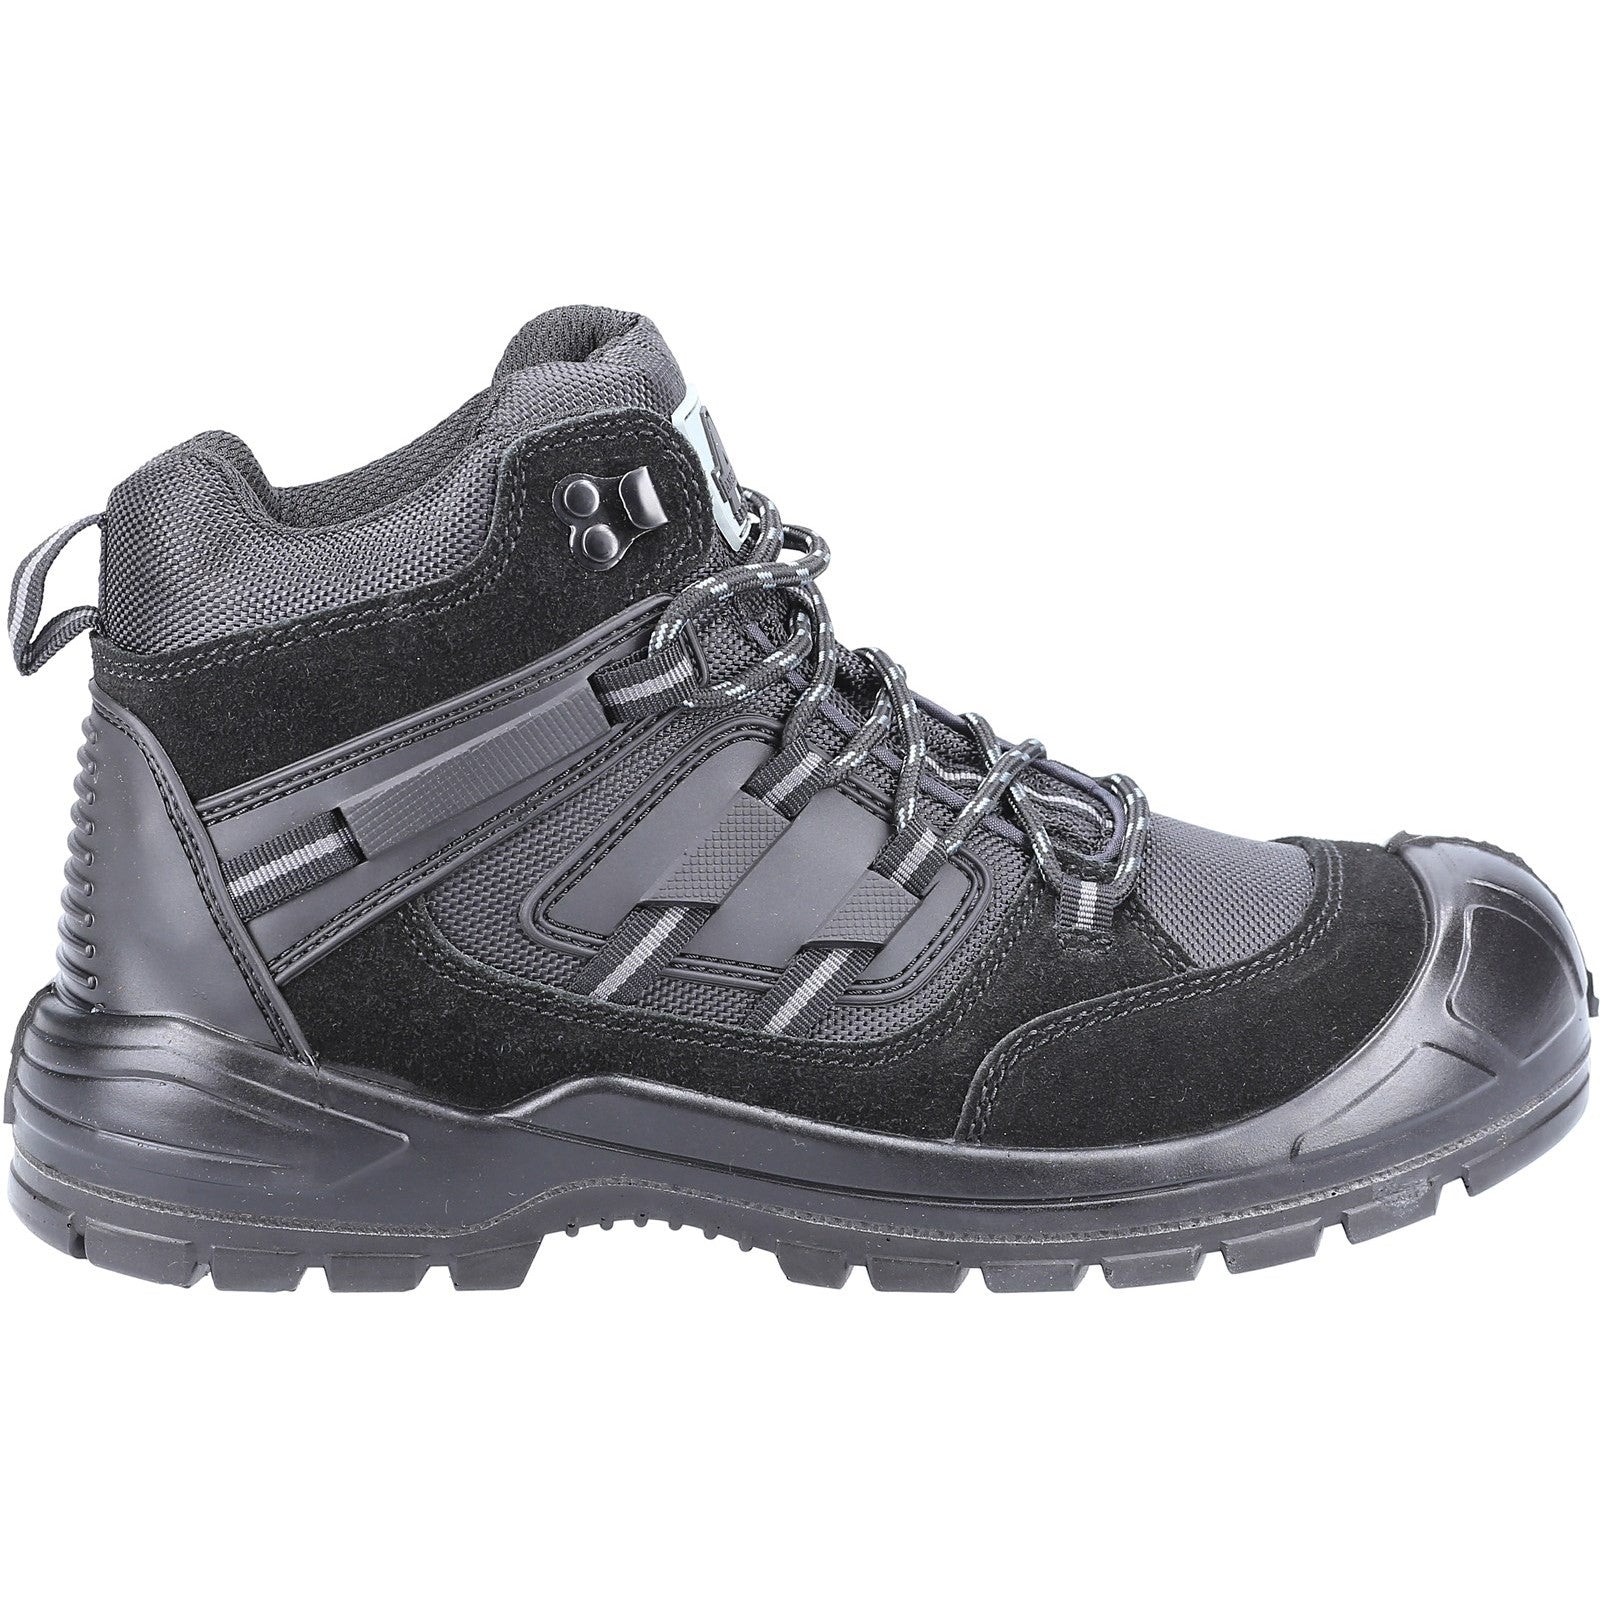 Amblers 257 Safety Boot